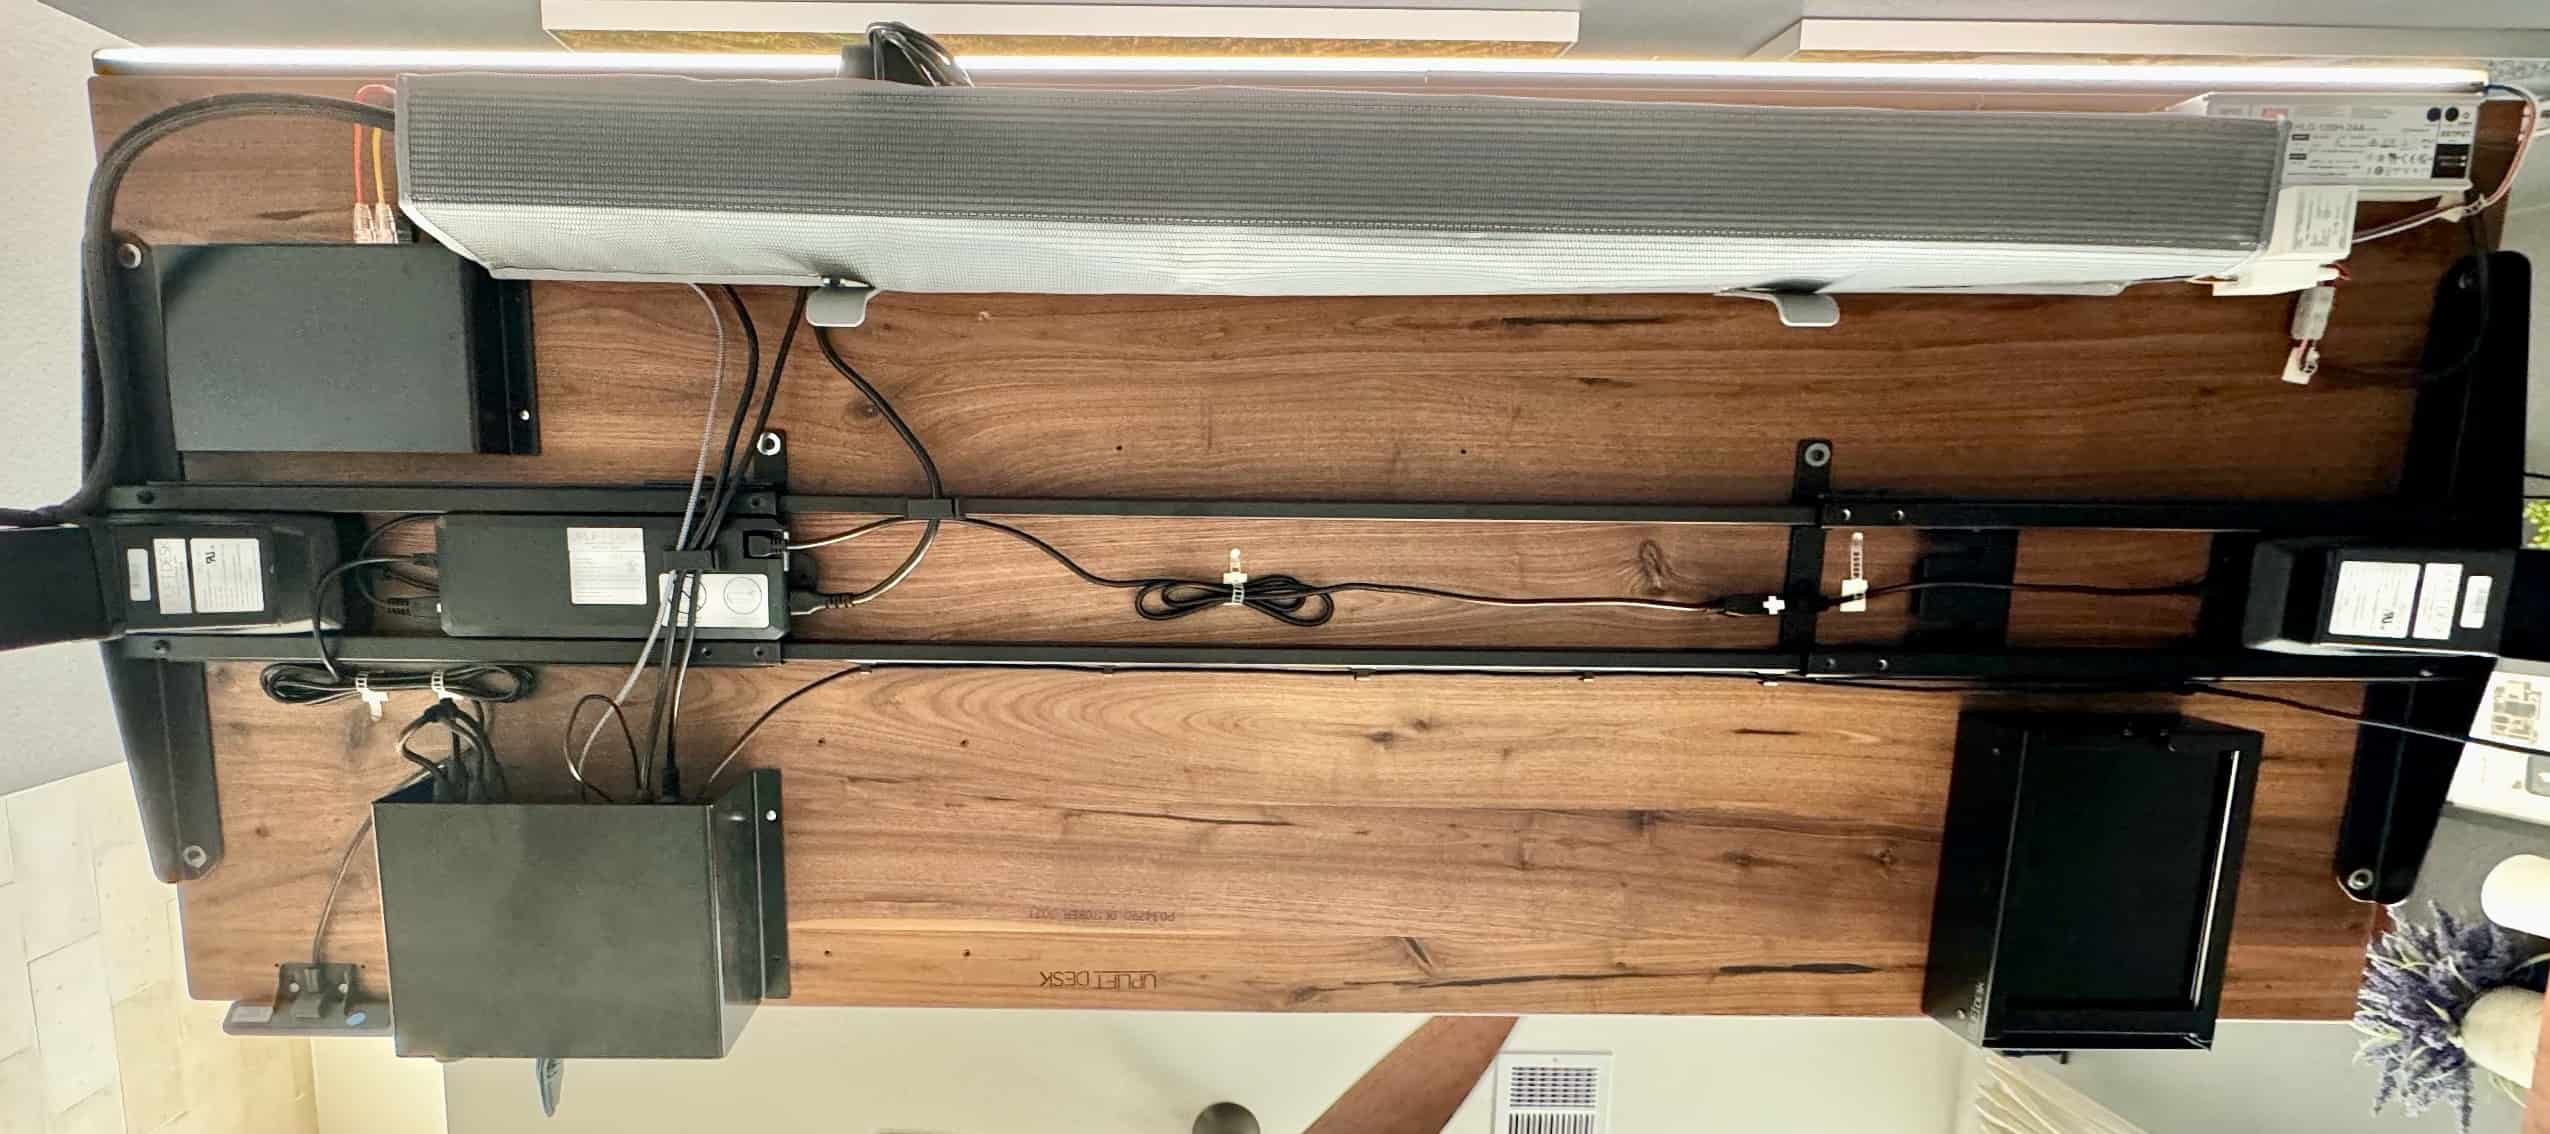 Under Desk Mounting Bracket Compatible with Caldigit TS4